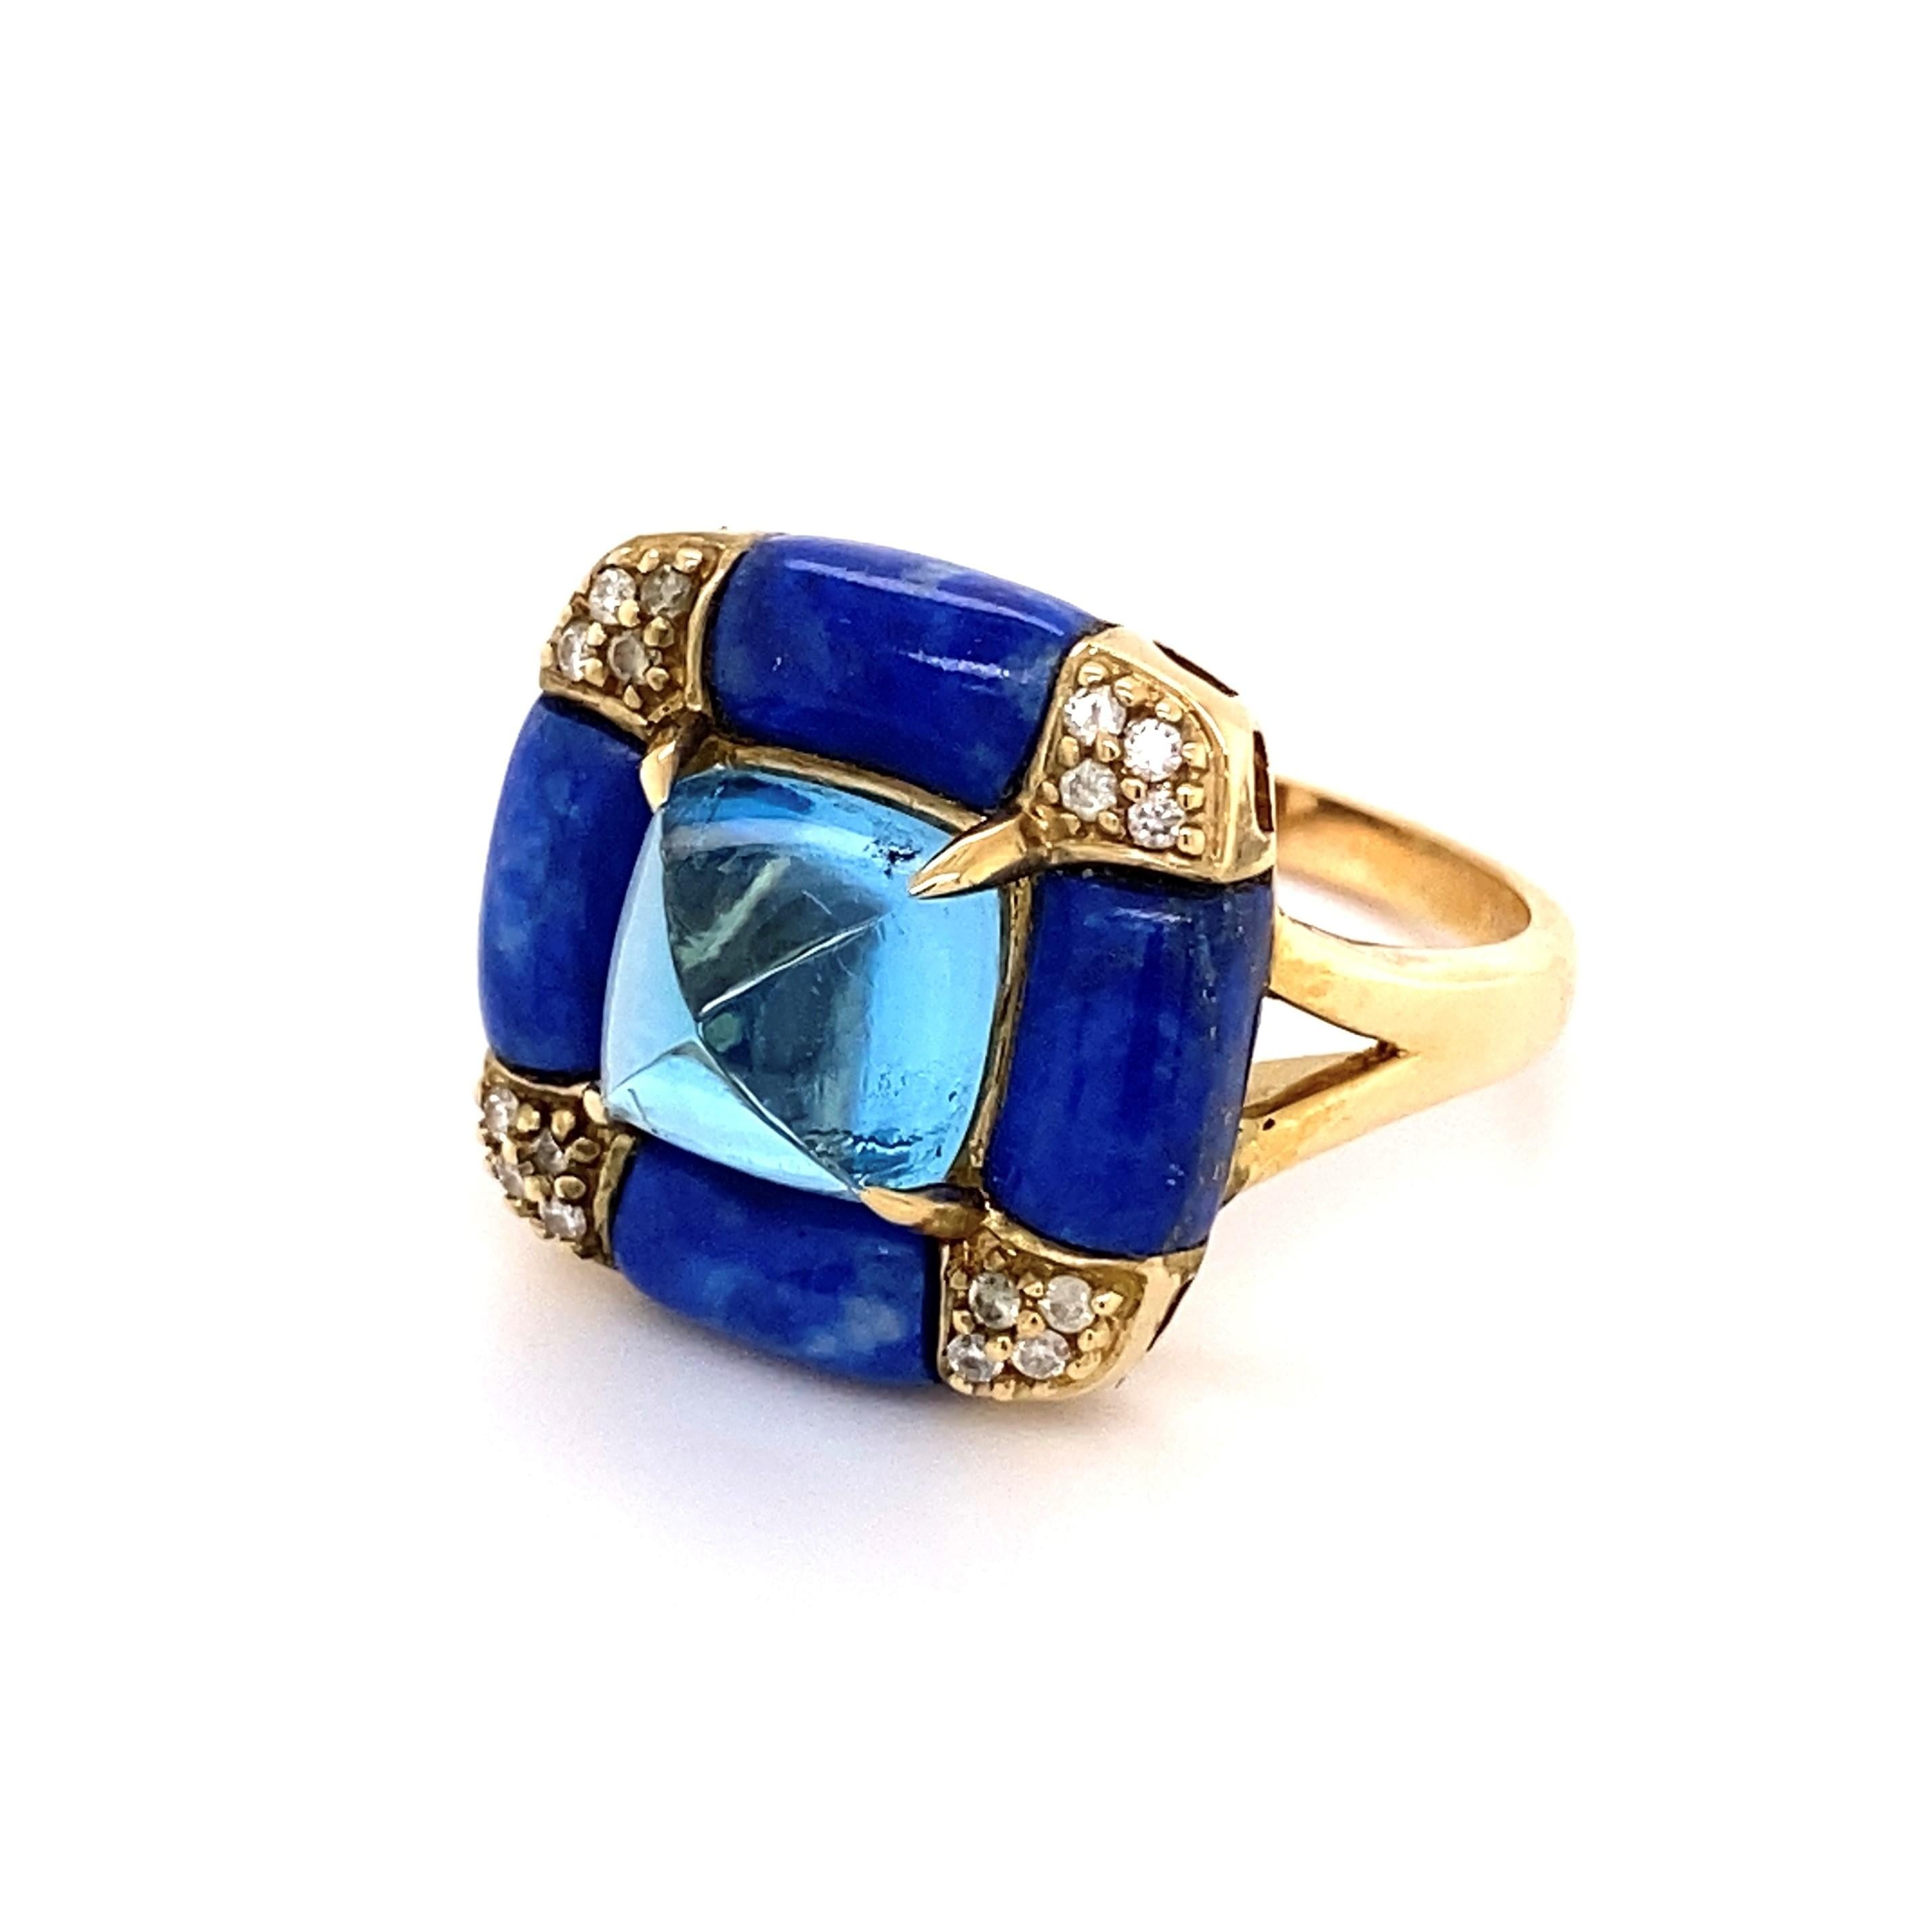 Modern 5.38 Carat Sugarloaf Blue Topaz Lapis and Diamond Ring Estate Fine Jewelry For Sale